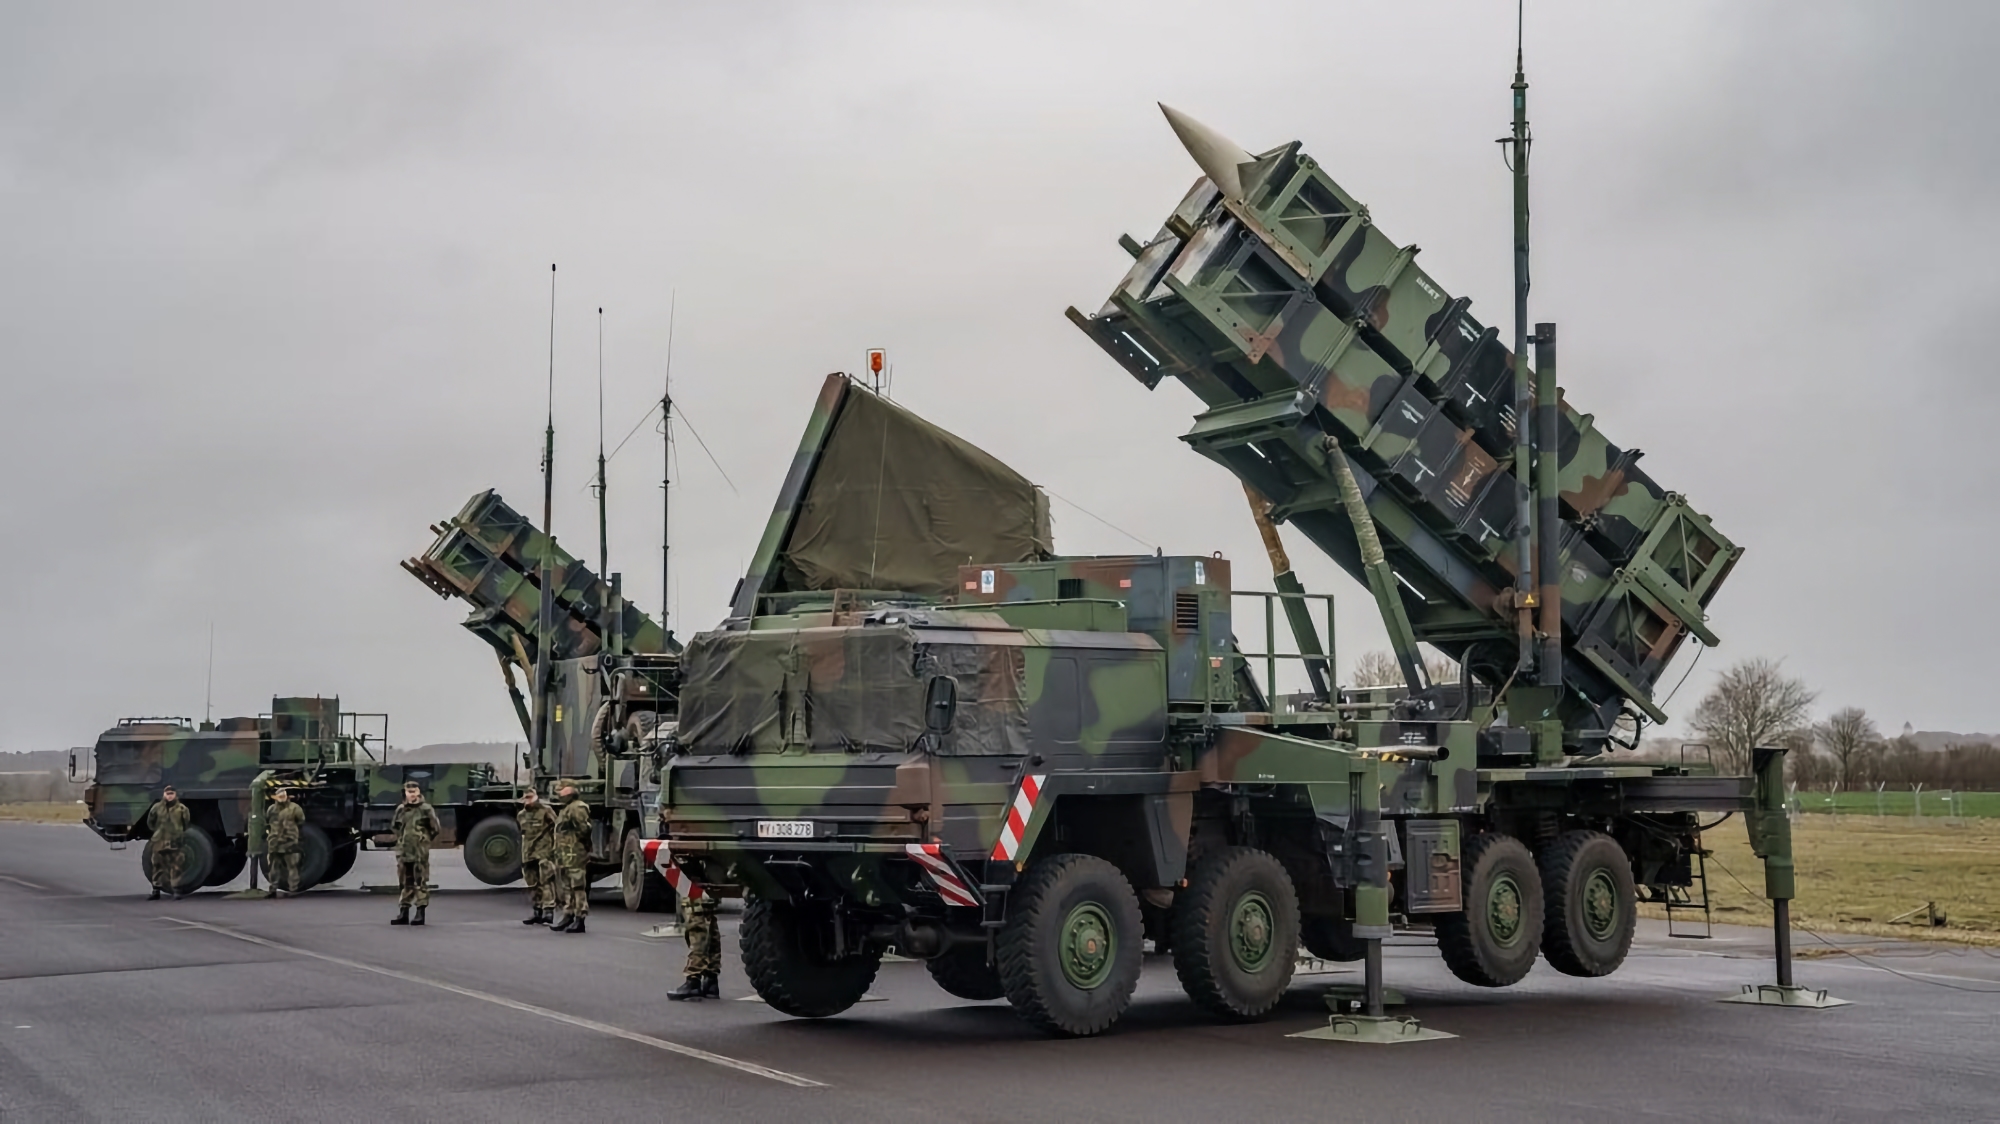 When Germany will transfer an additional battery of MIM-104 Patriot SAMs to Ukraine